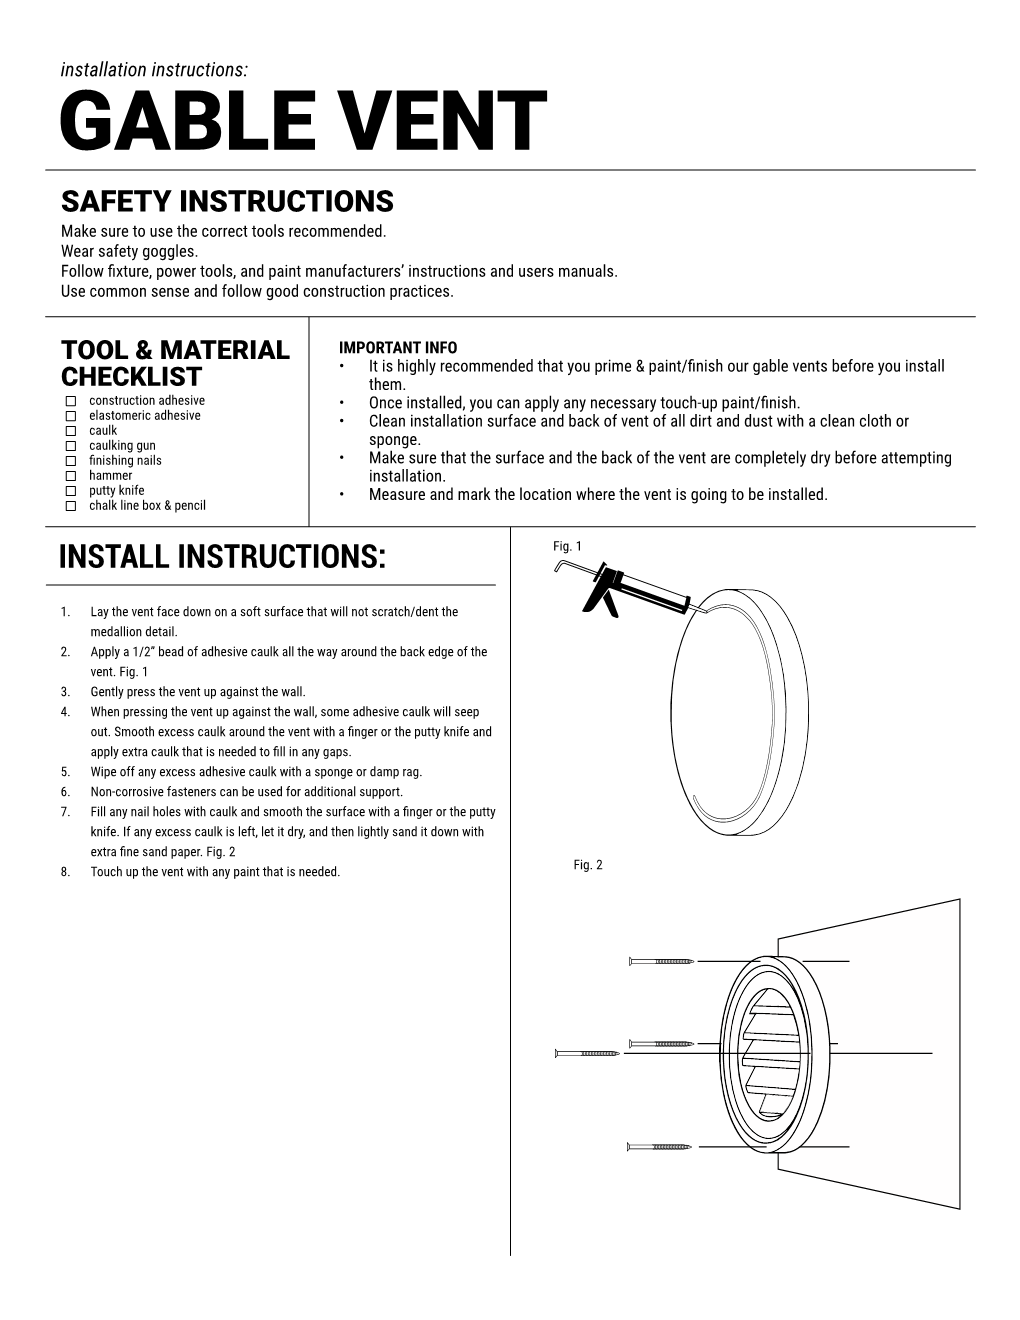 GABLE VENT SAFETY INSTRUCTIONS Make Sure to Use the Correct Tools Recommended